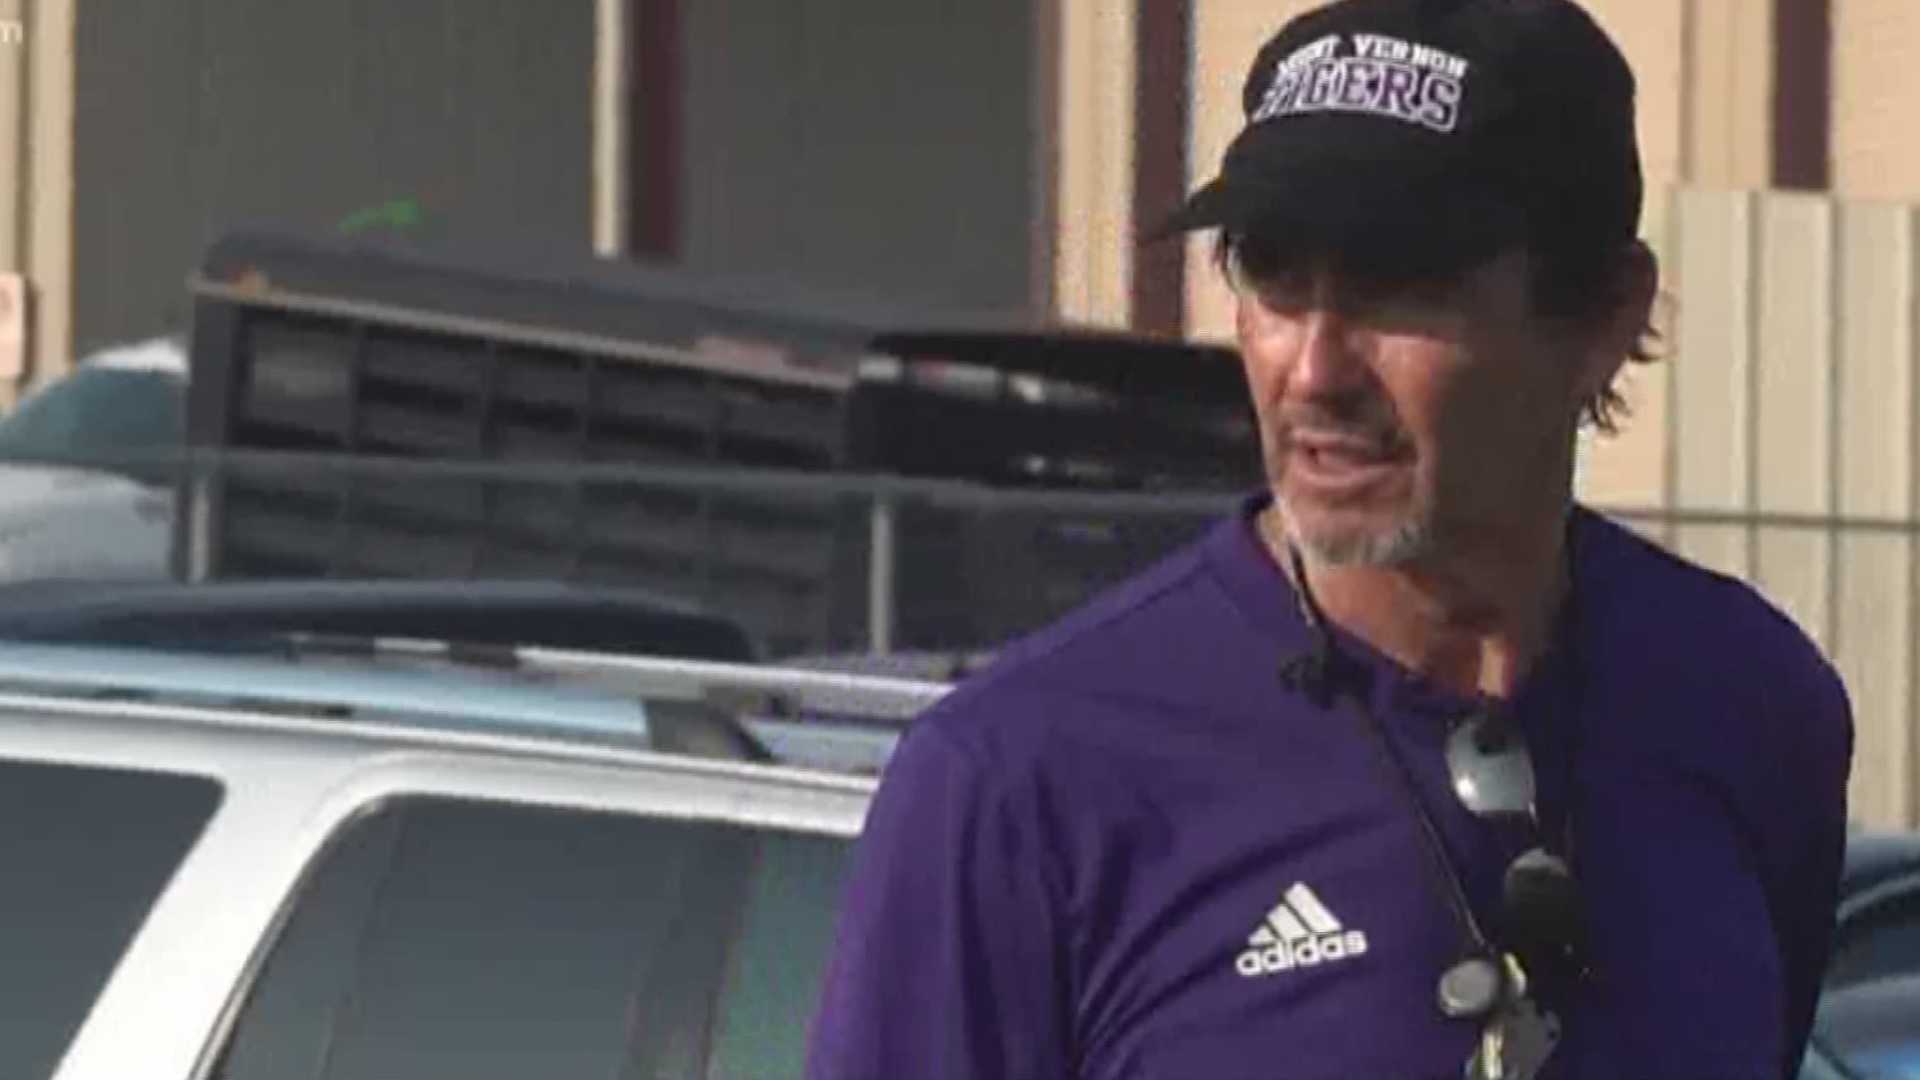 Briles was back coaching high school football for the first time in 20 years.